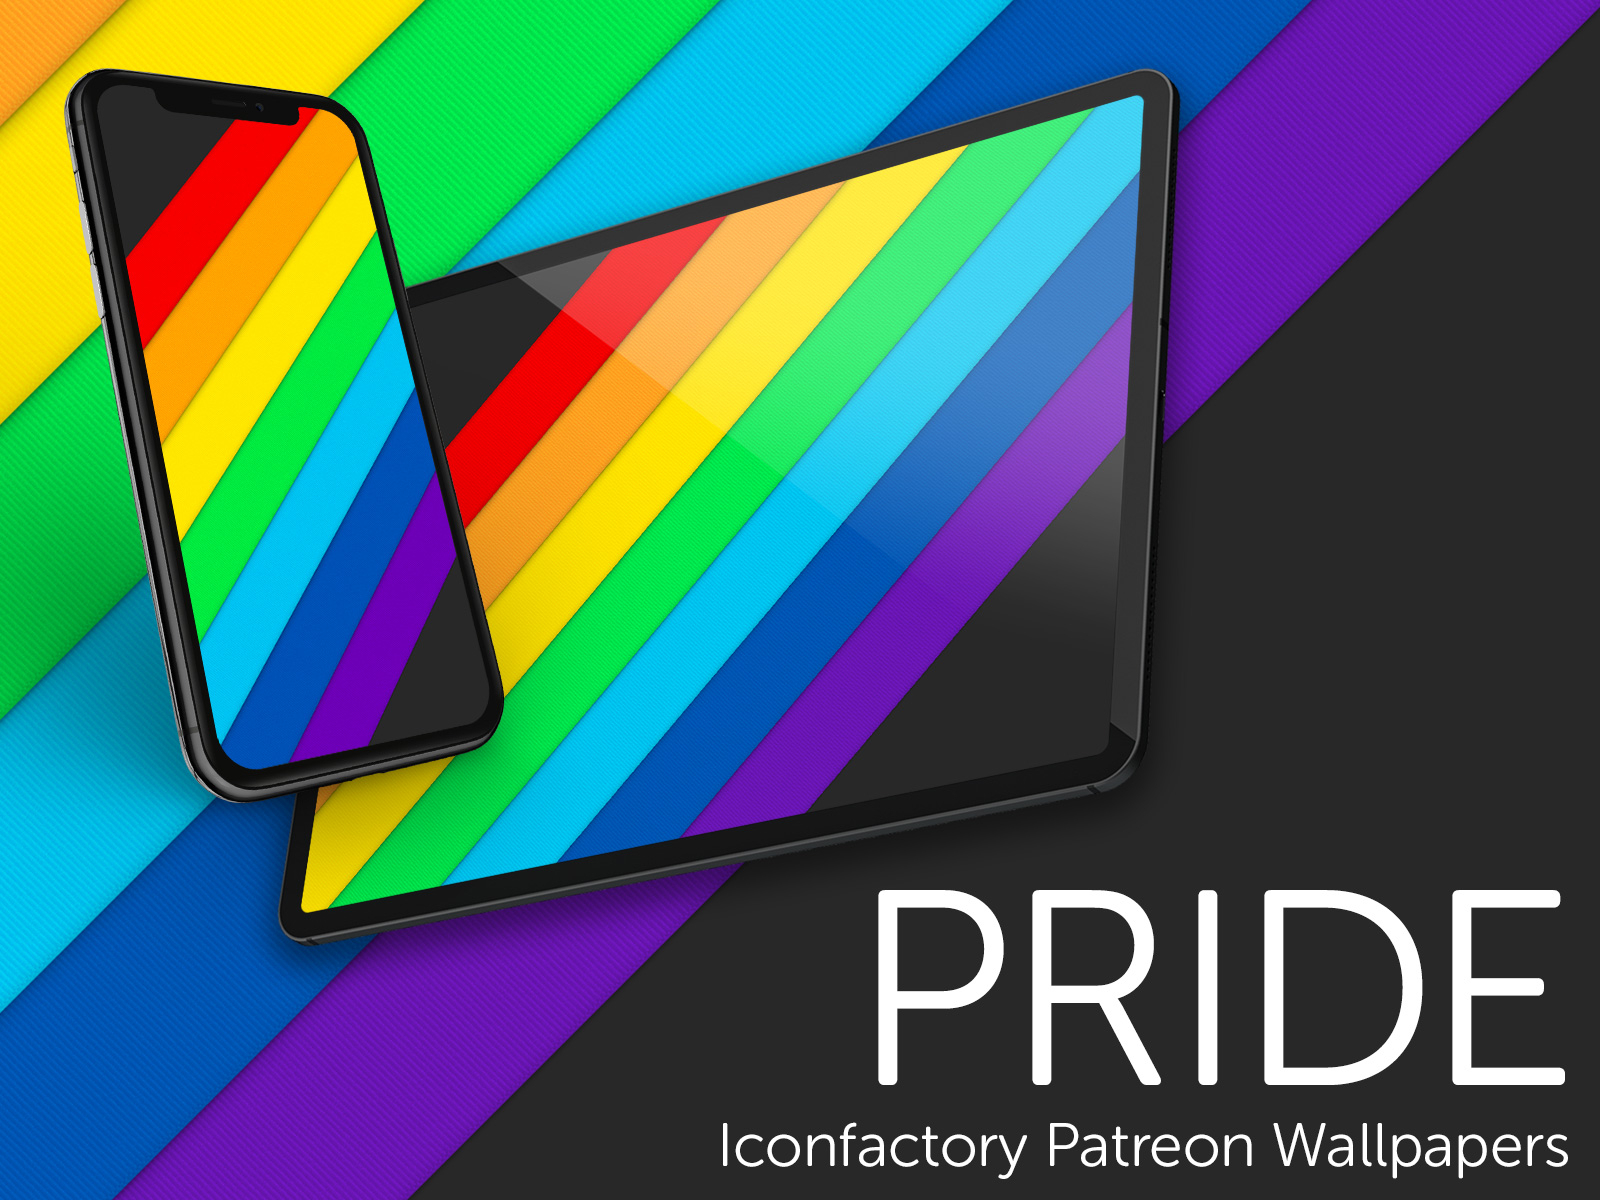 Pride - Wallpaper by Iconfactory on Dribbble